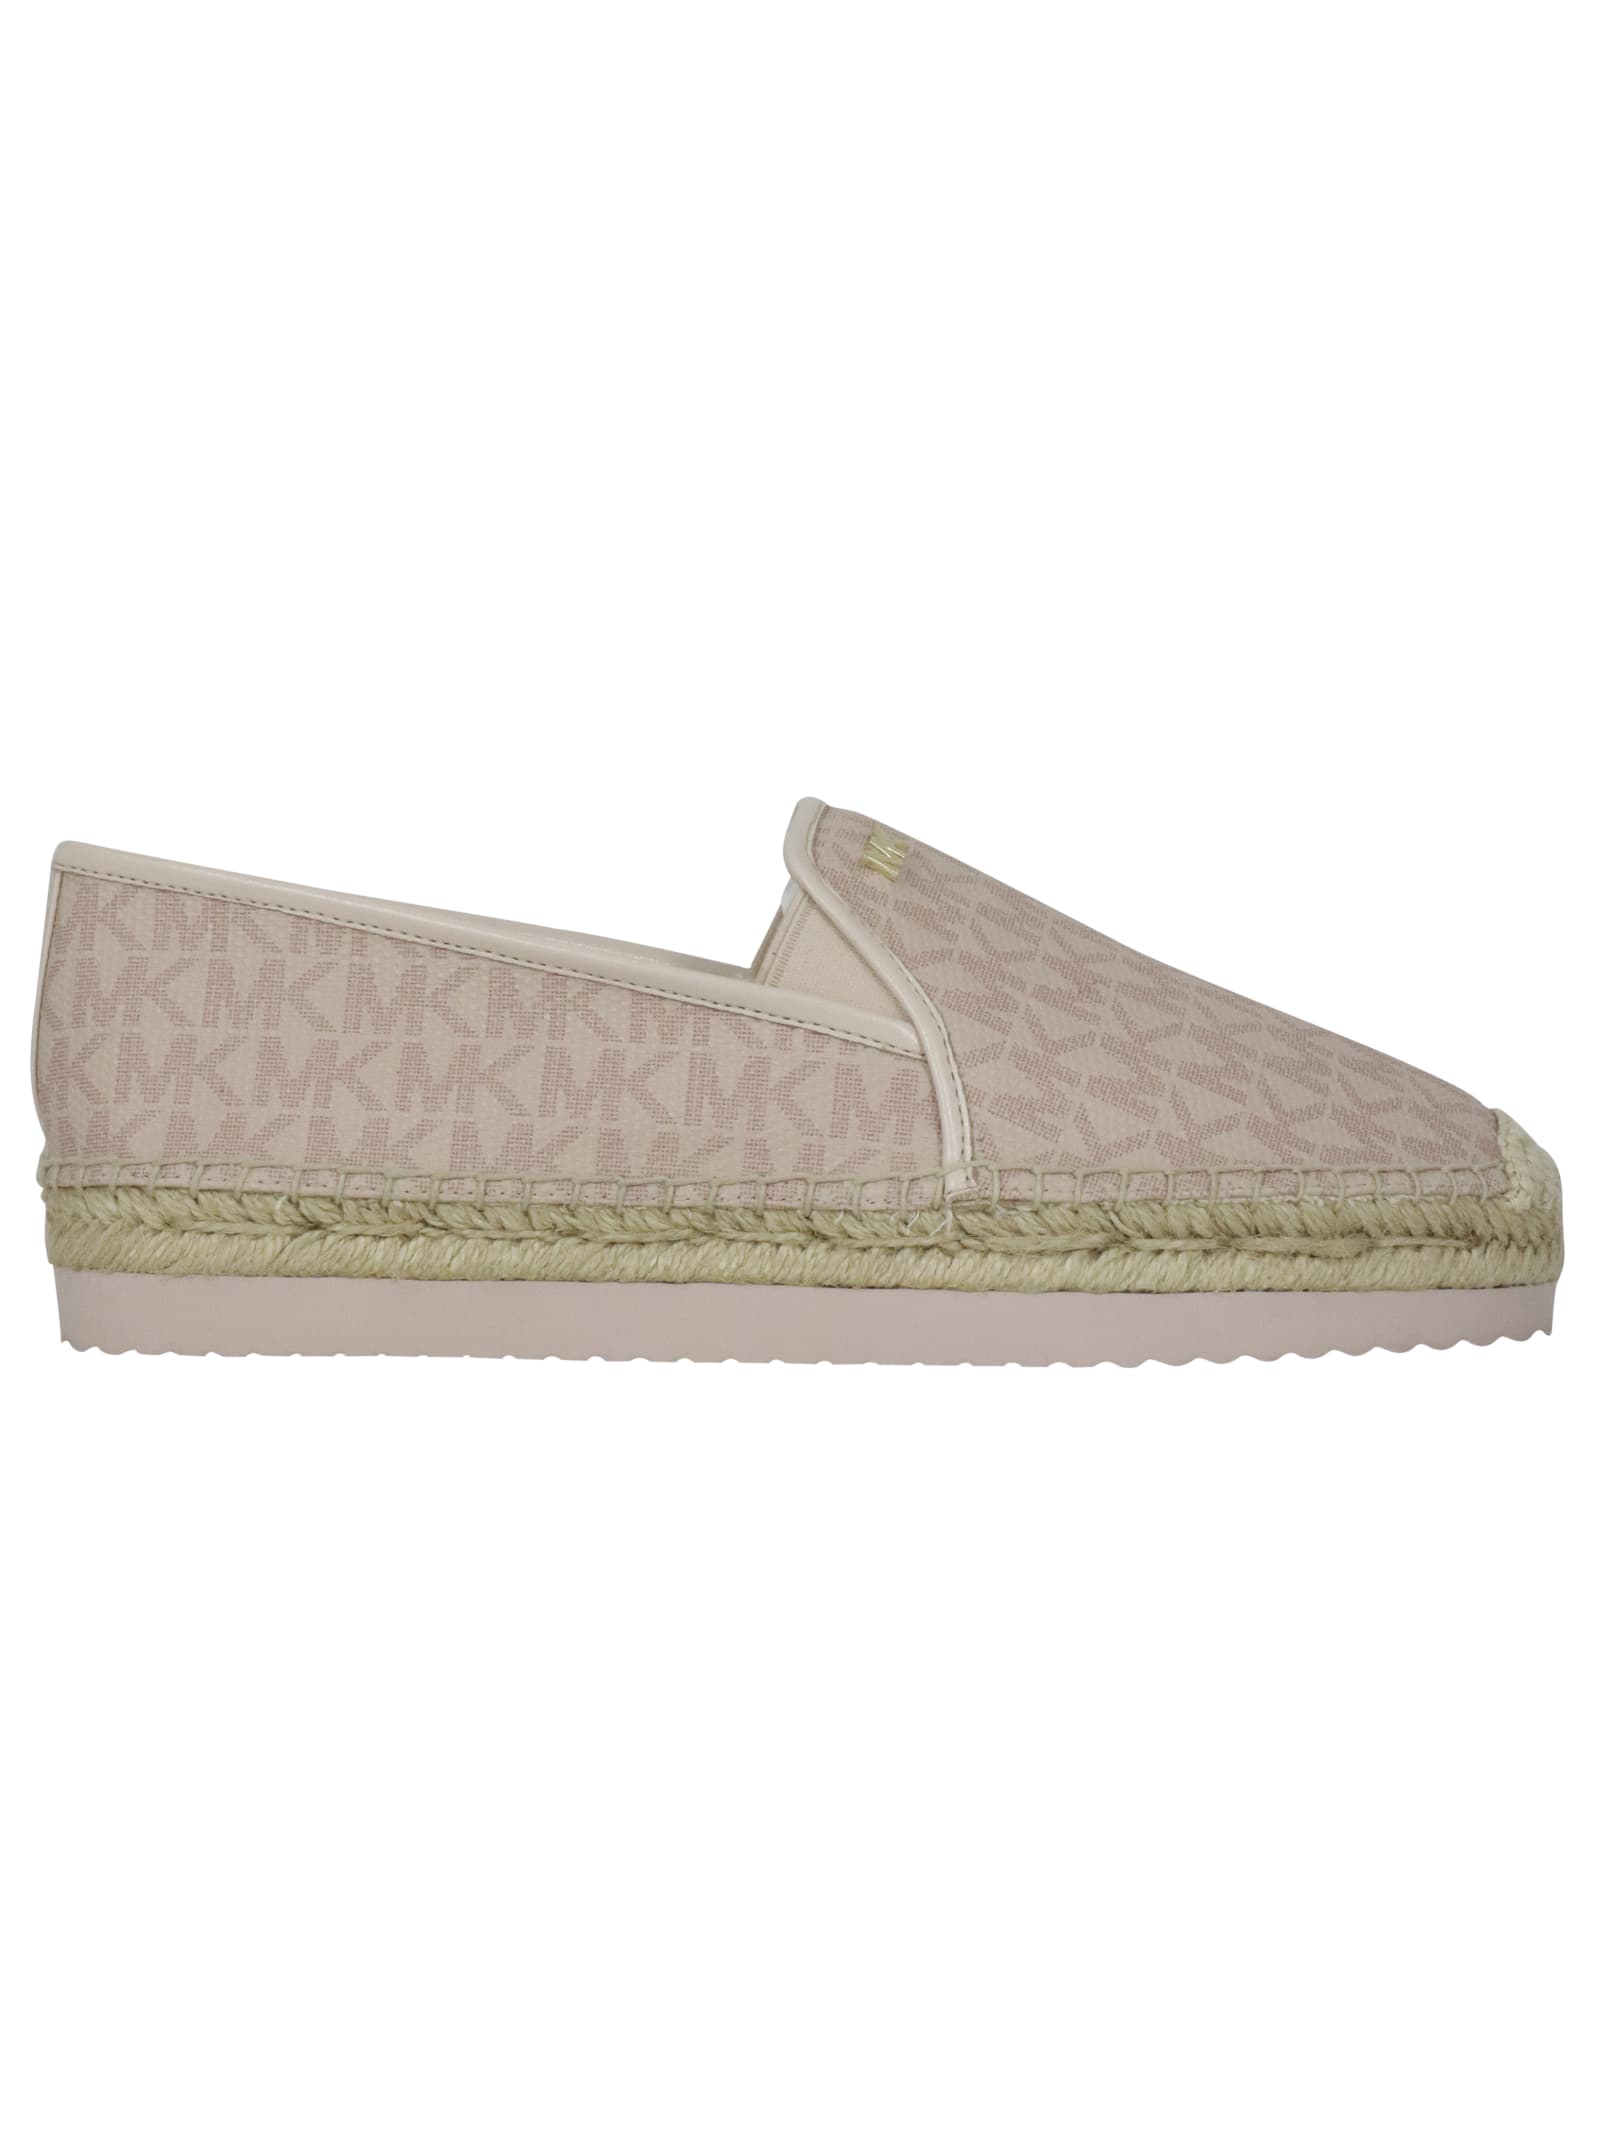 Buy Michael Kors Hastings Slip On Espadrillas online, shop Michael Kors shoes with free shipping